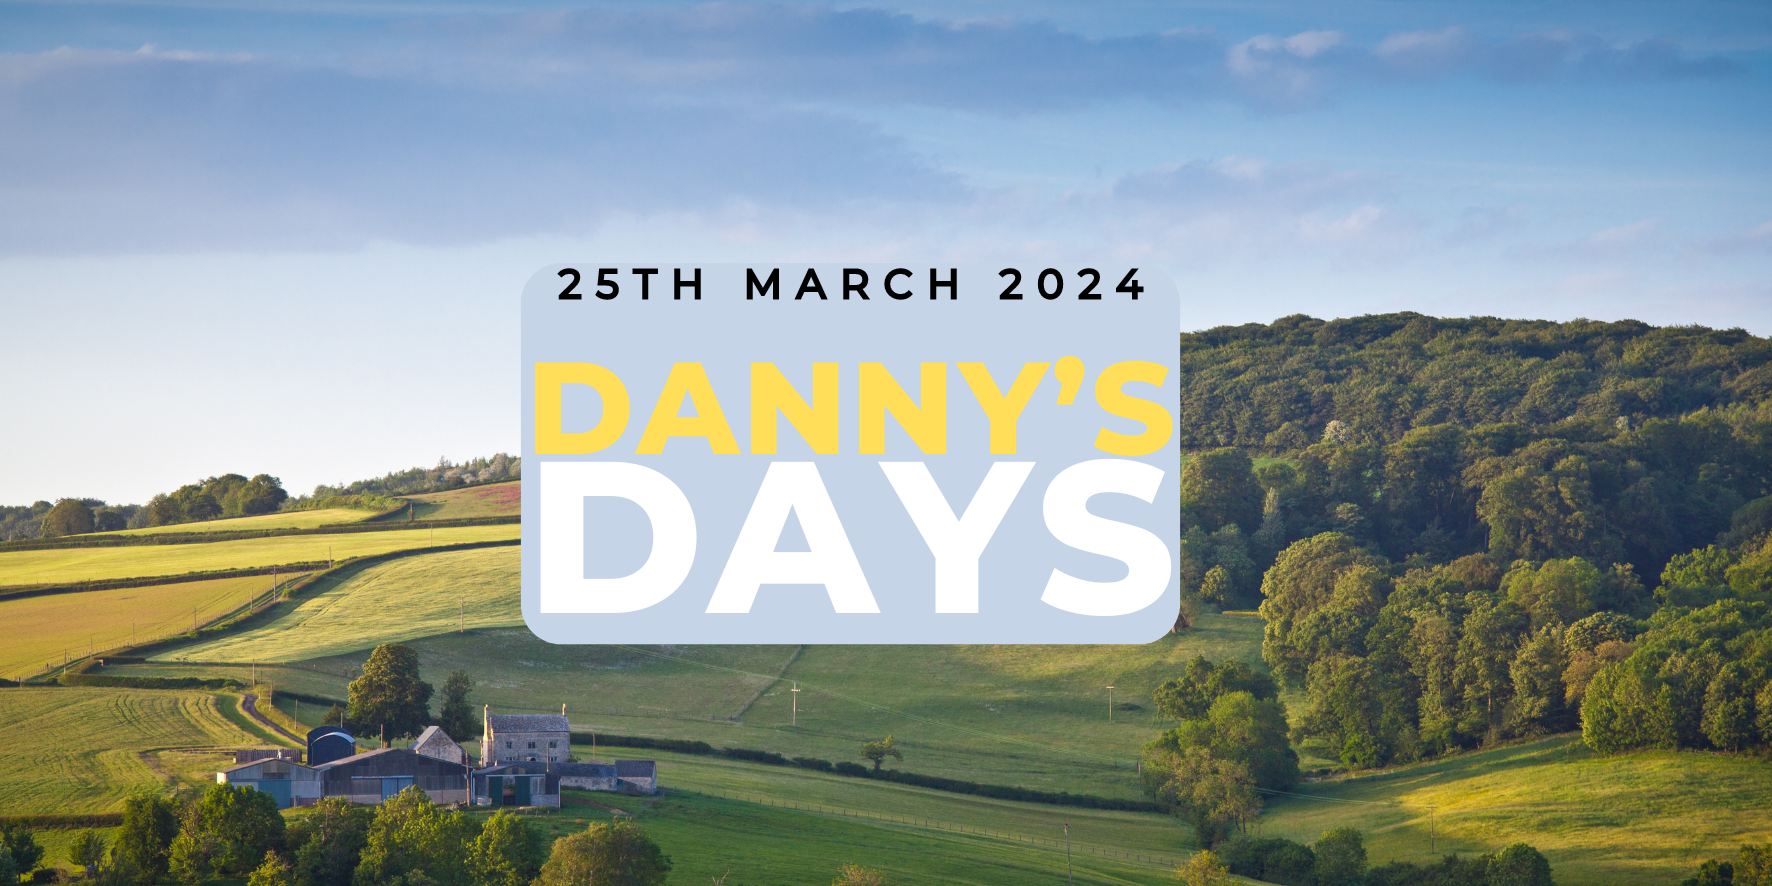 Danny's Days - 25th March 2024